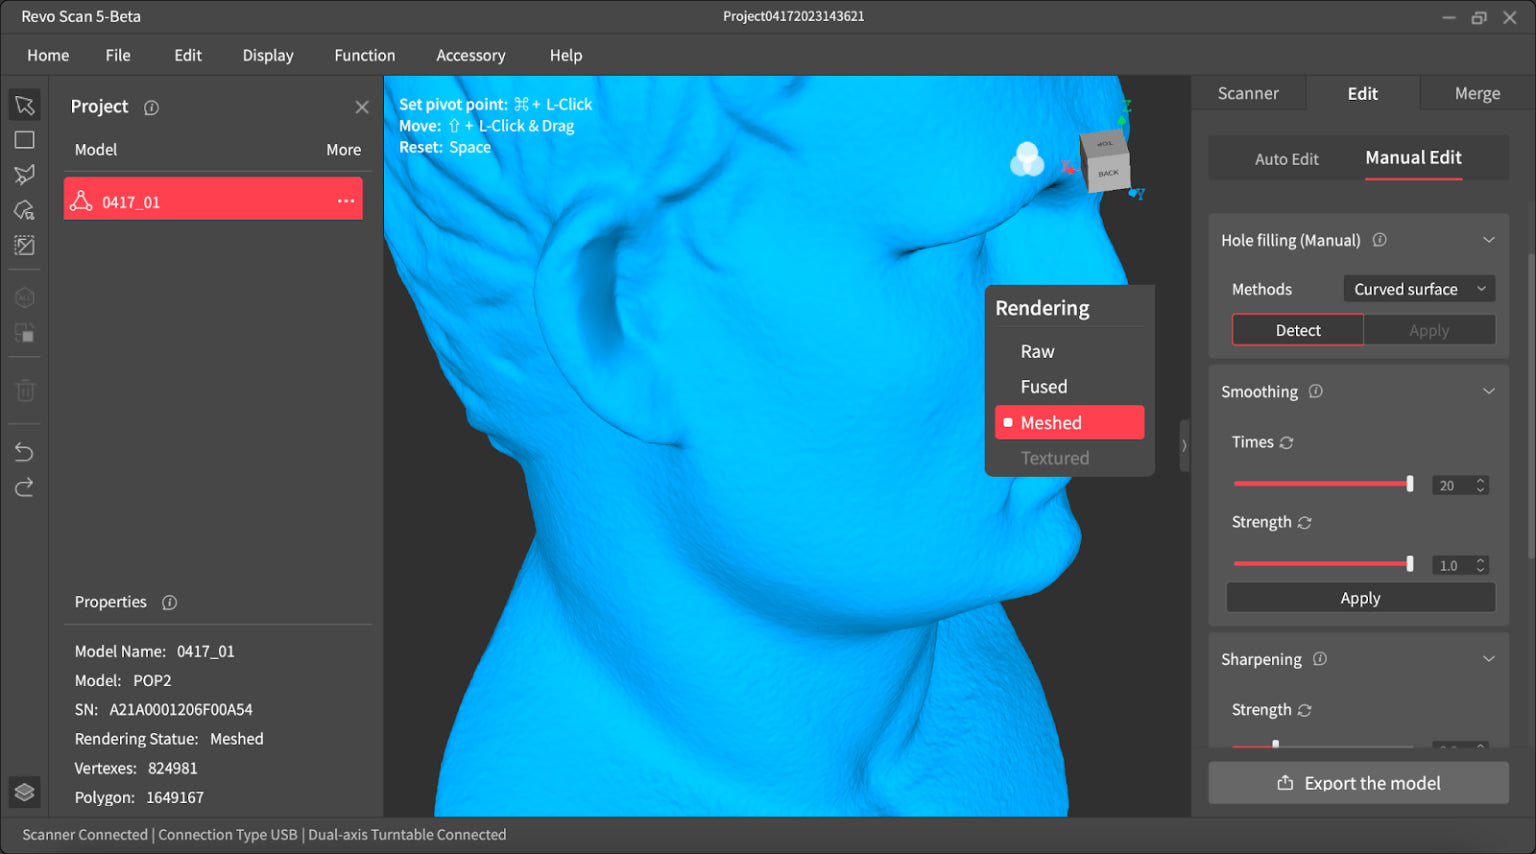 Adjusting Your Revopoint 3D Scanners’ Exposure